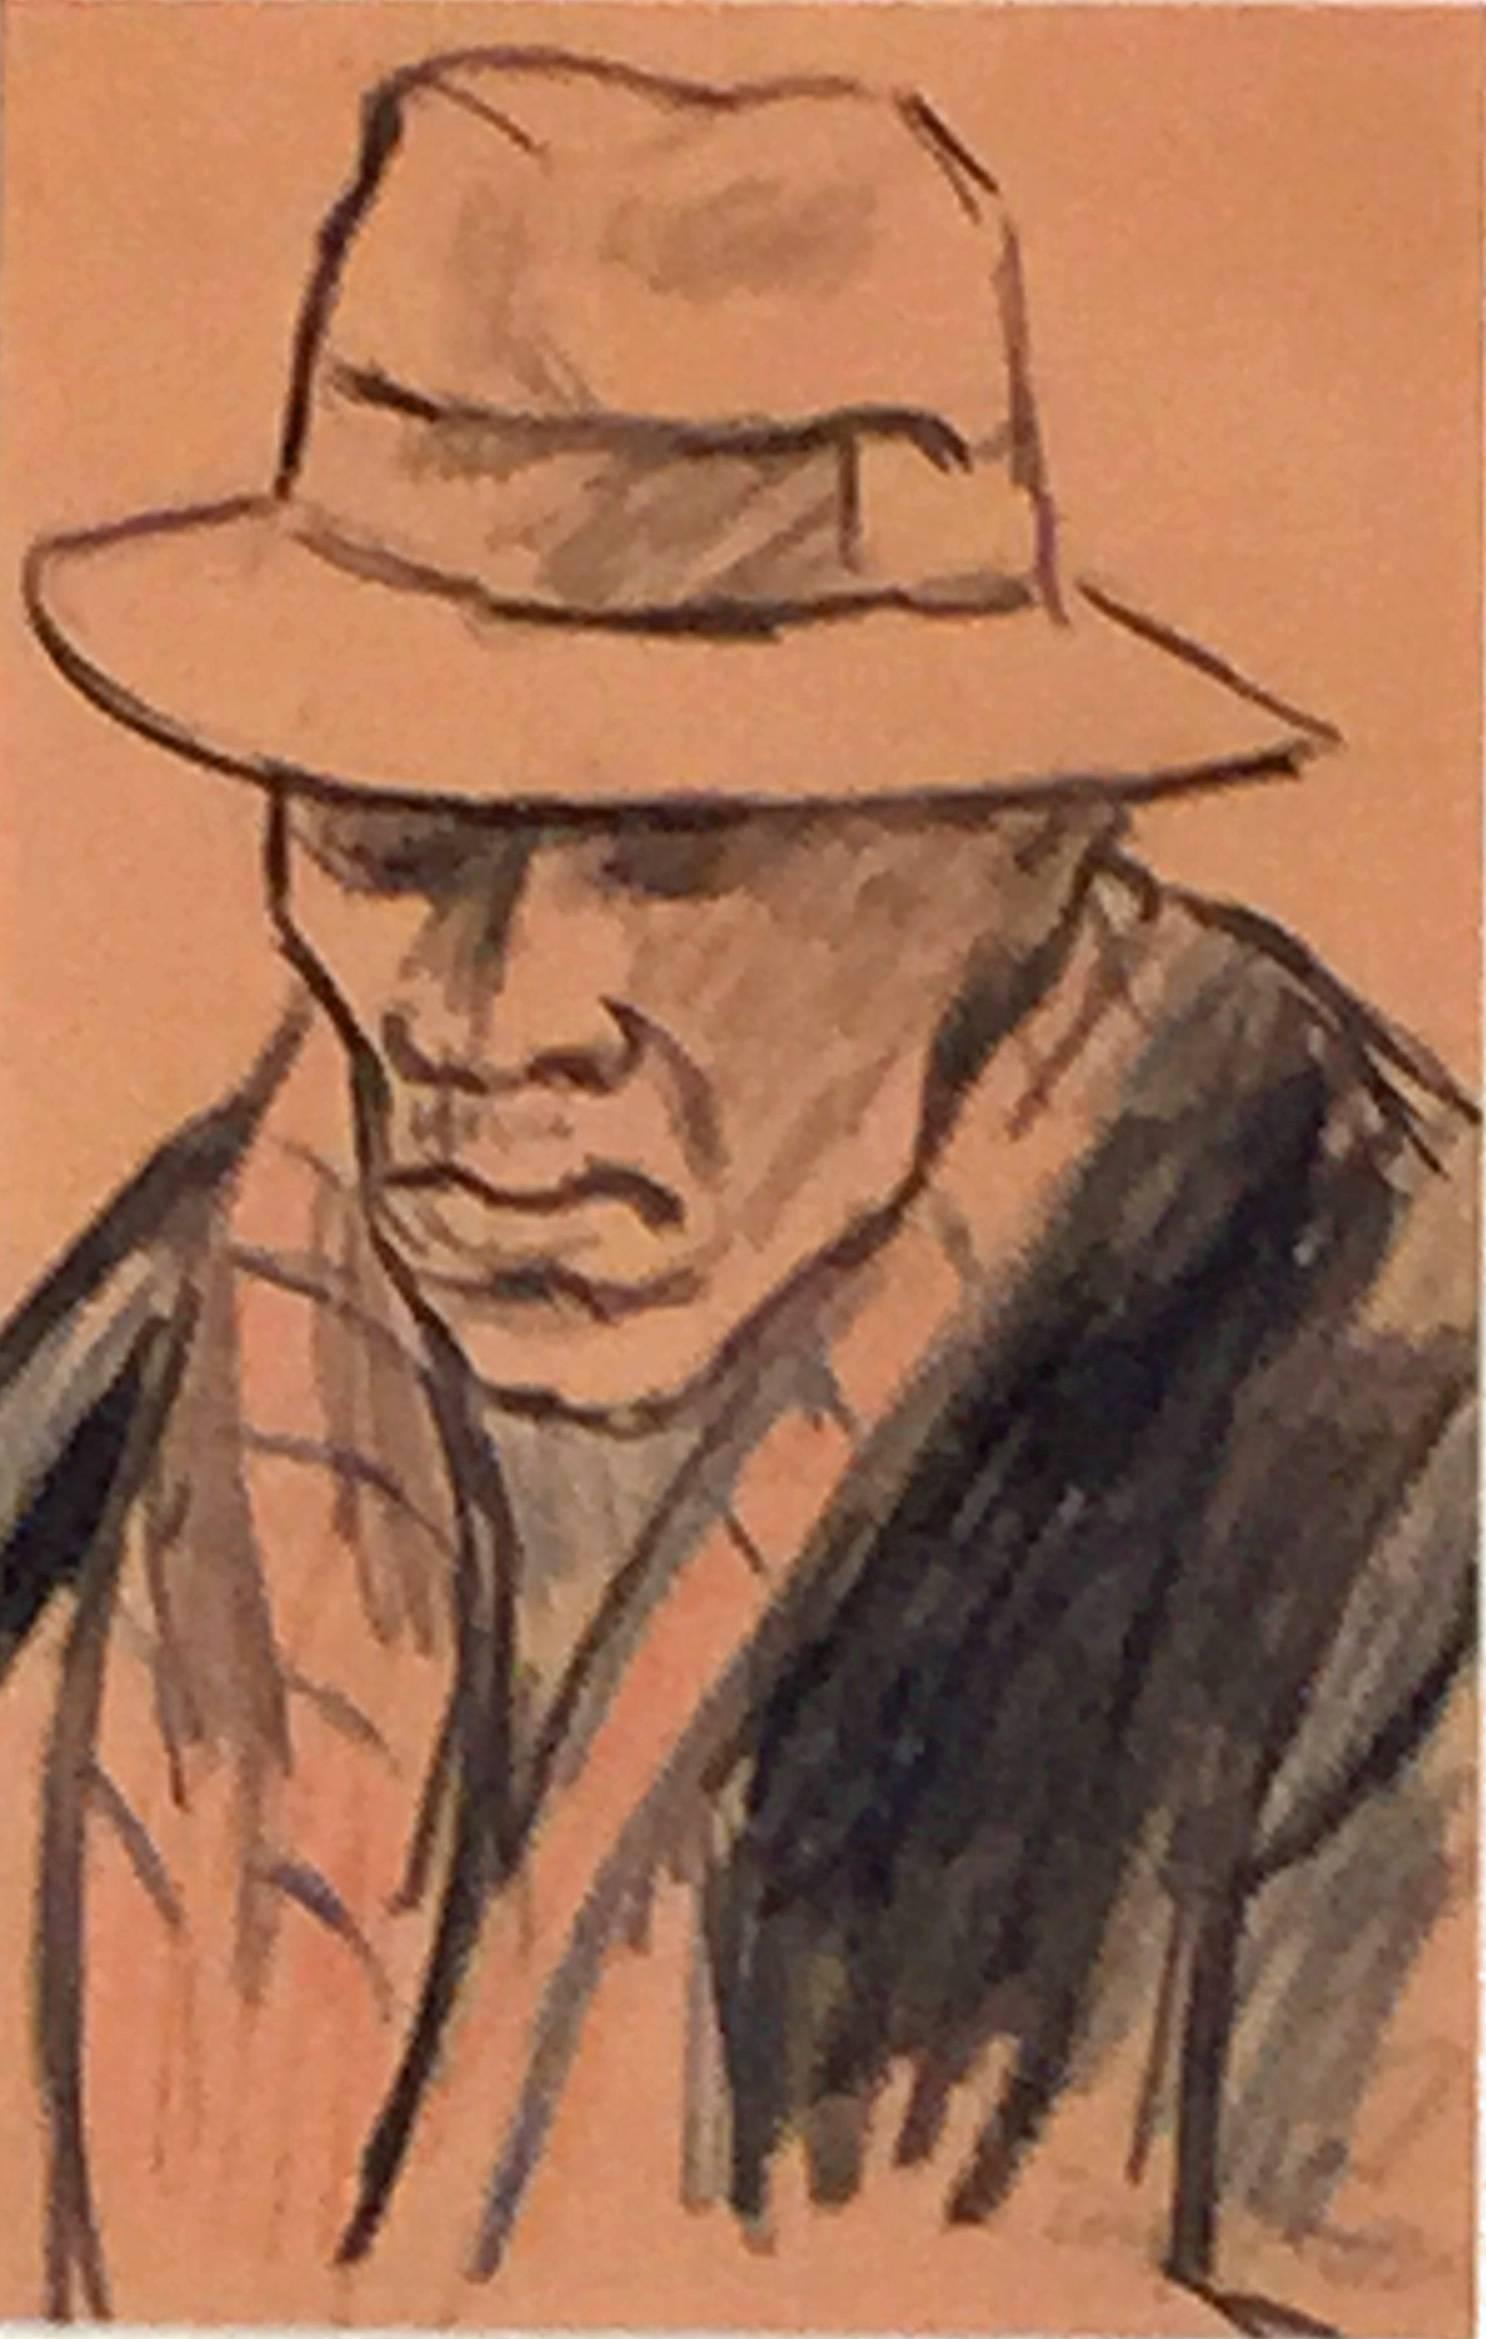 STUDY OF A MAN WITH A HAT AND OVERCOAT